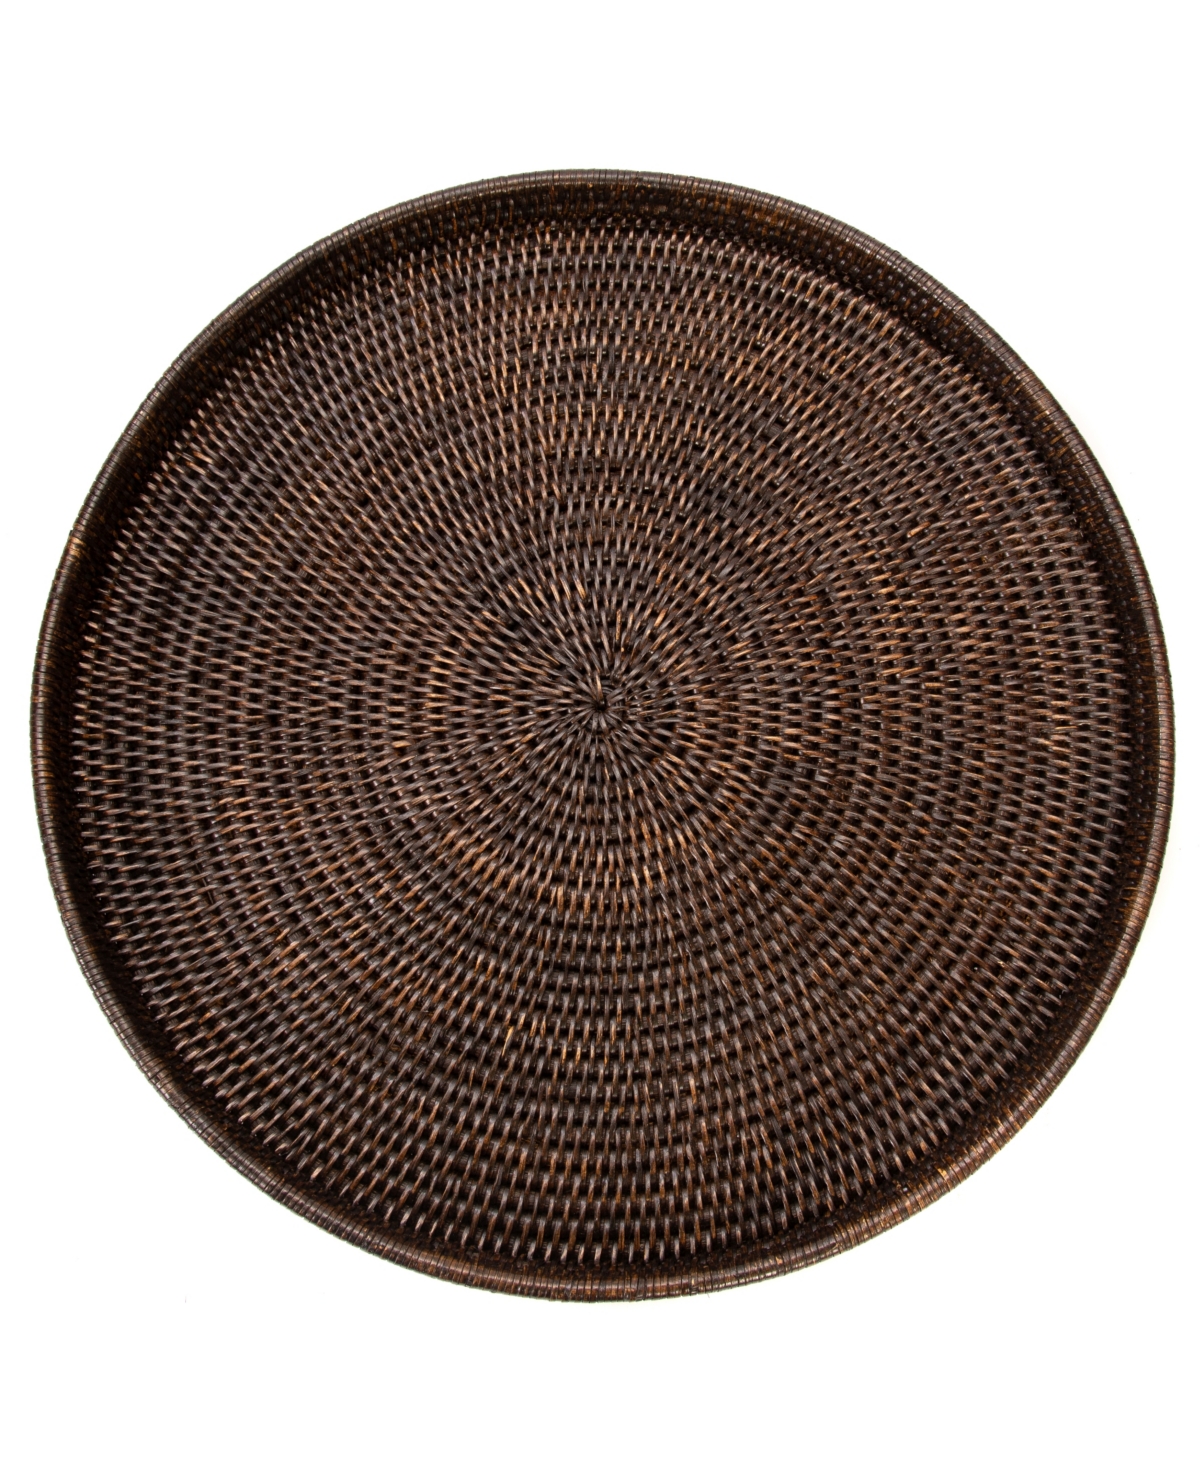 Artifacts Trading Company Artifacts Rattan Round Tray In Coffee Bean